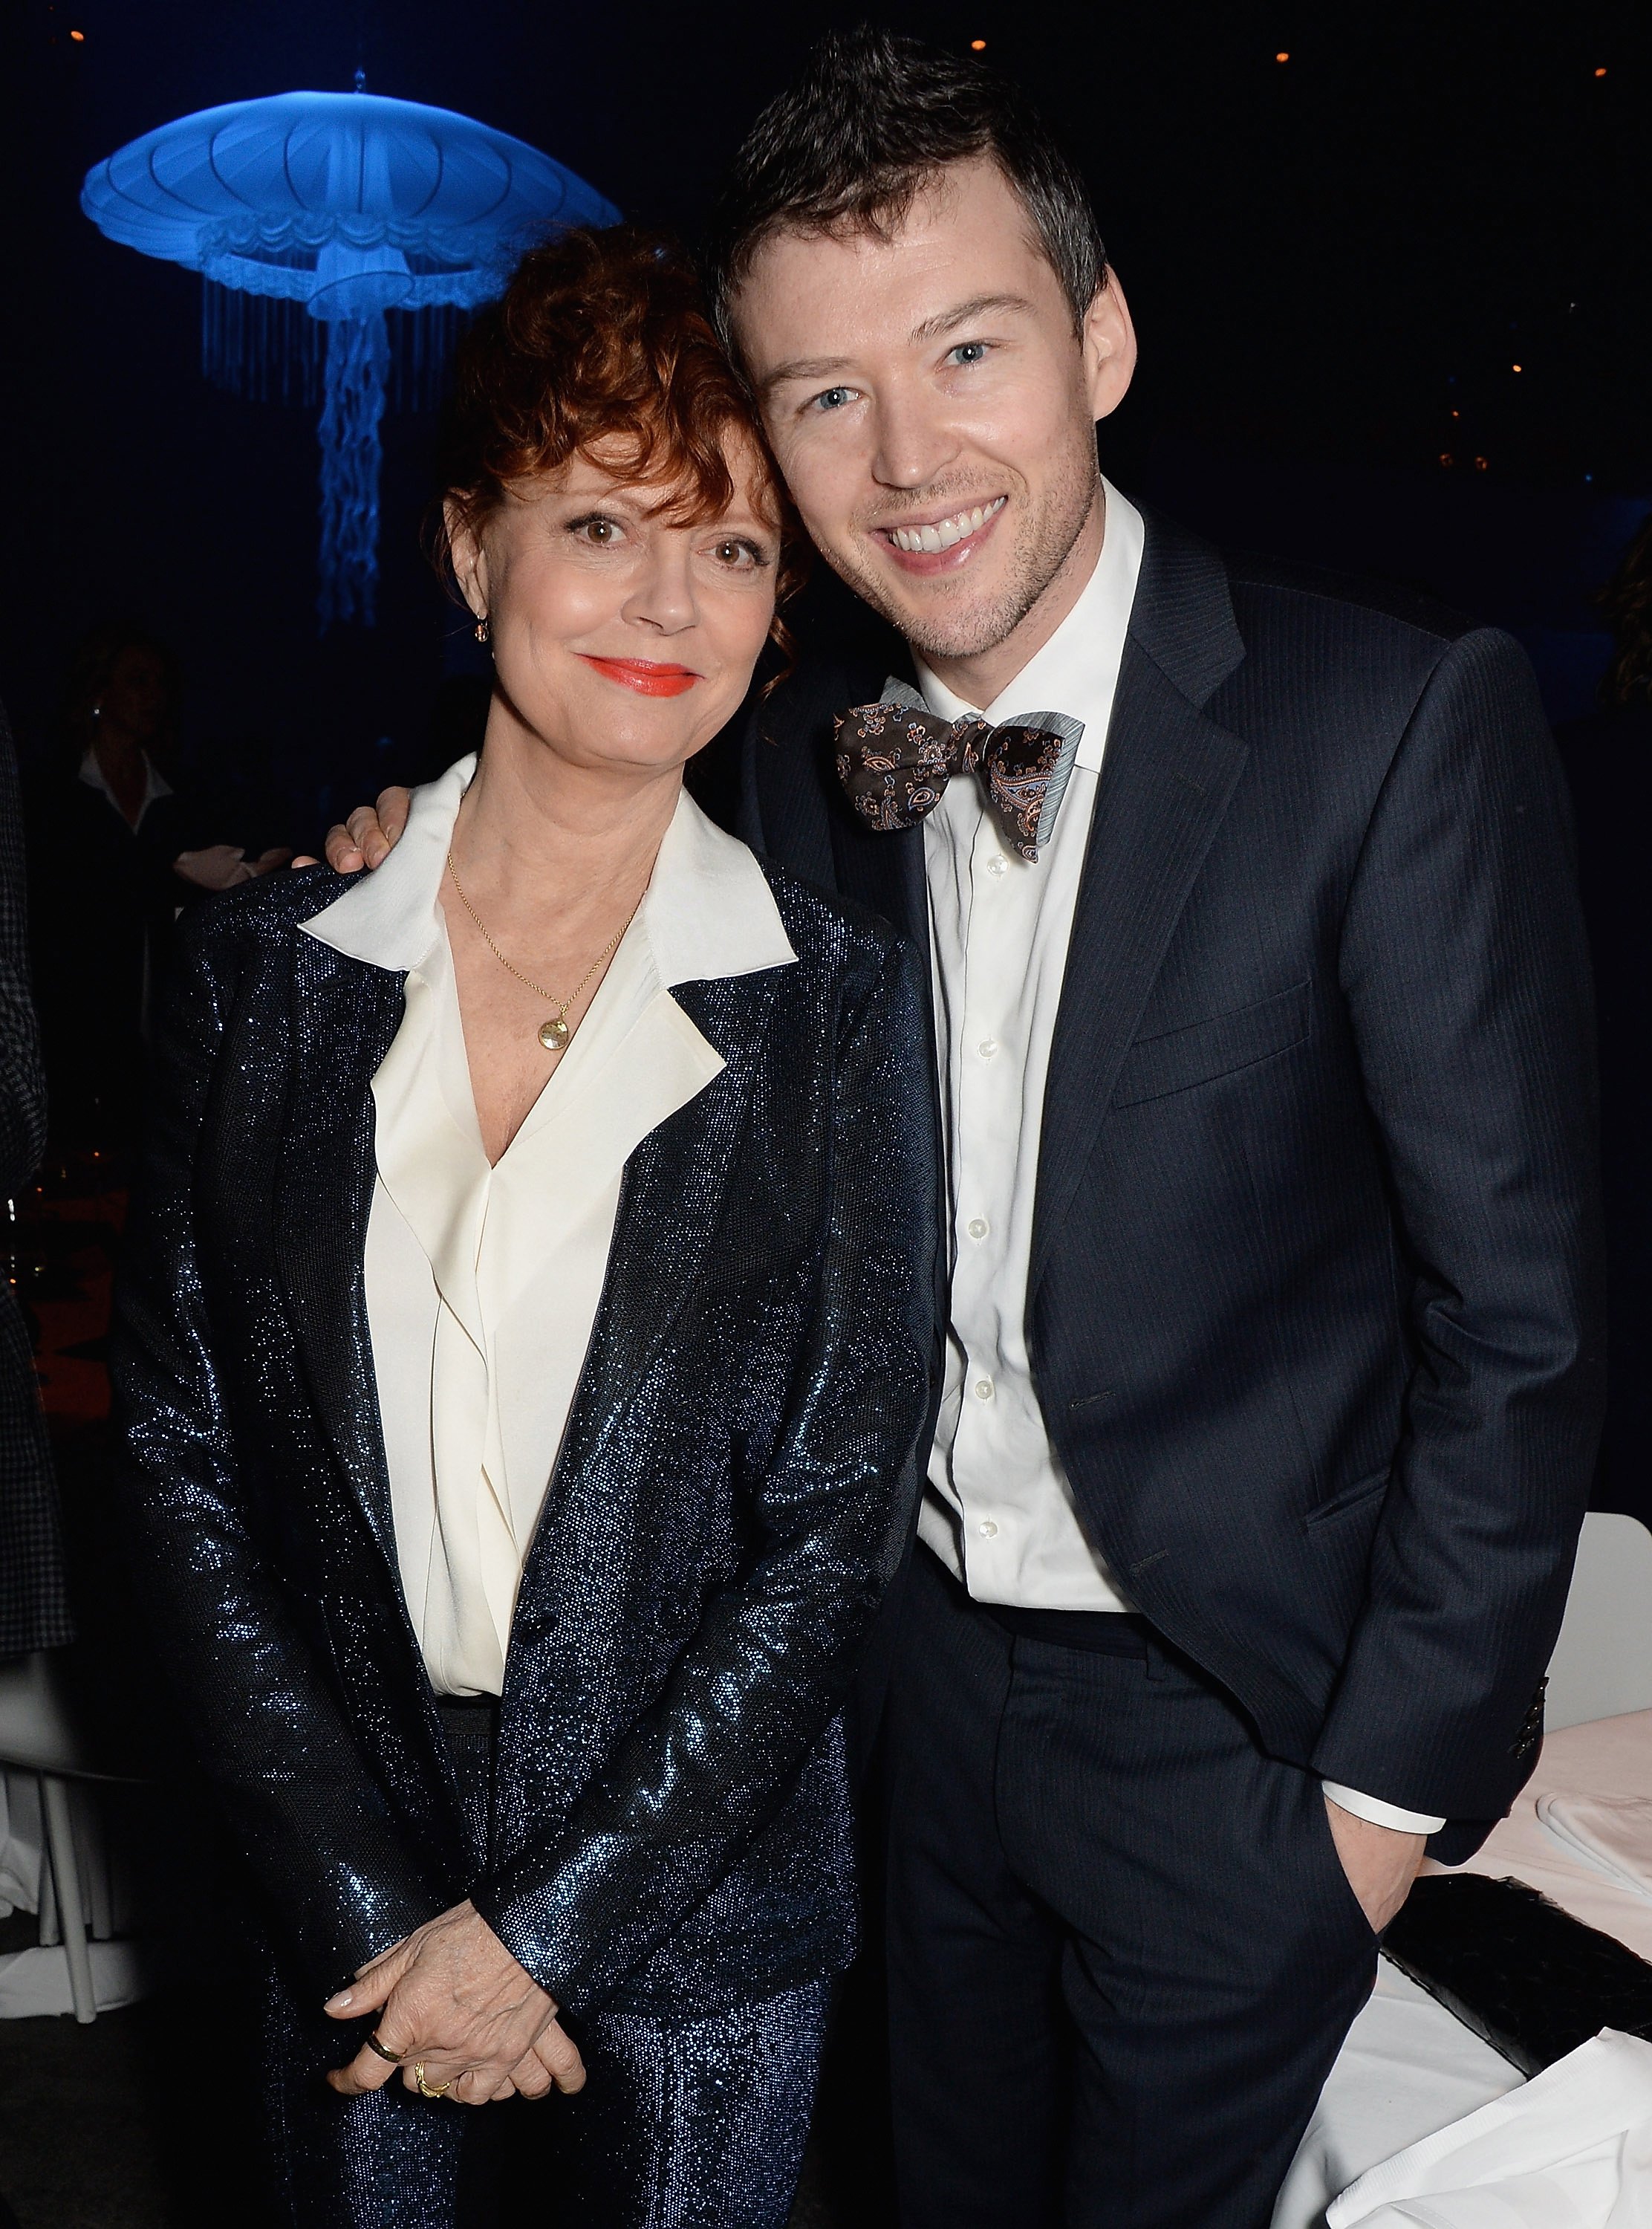 Susan Sarandon and Jonathan Bricklin attend the IWC "Inside The Wave" Gala event during the Salon International de la Haute Horlogerie (SIHH) 2014 at Palexpo on January 21, 2014 in Geneva, Switzerland | Source: Getty Images